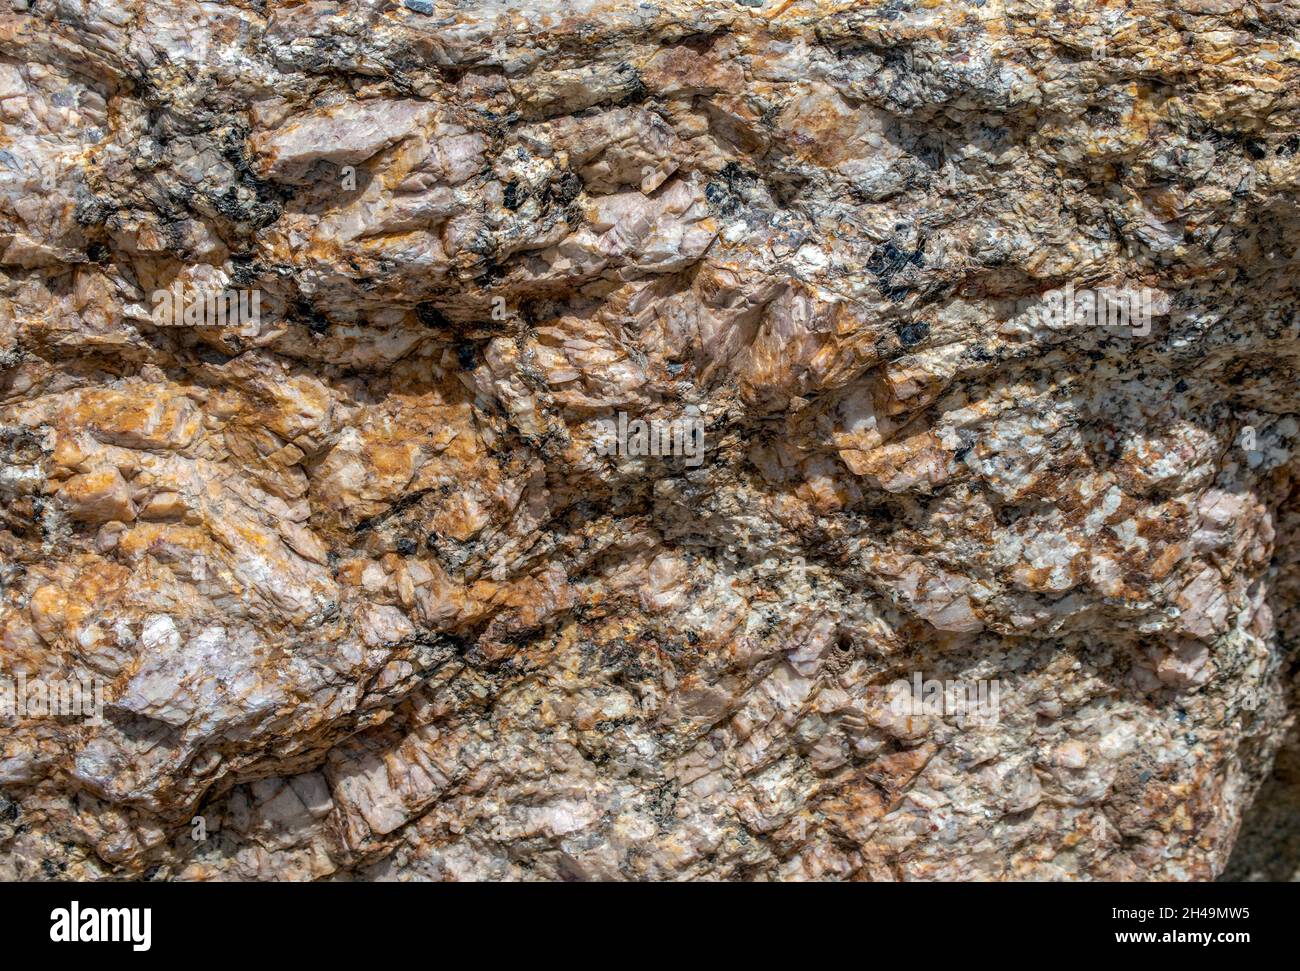 With lots of sizes, shapes, textures, lines, ridges and colors, this extremen closeup of a large rock portion of a Colorado mountain is glorious. Stock Photo